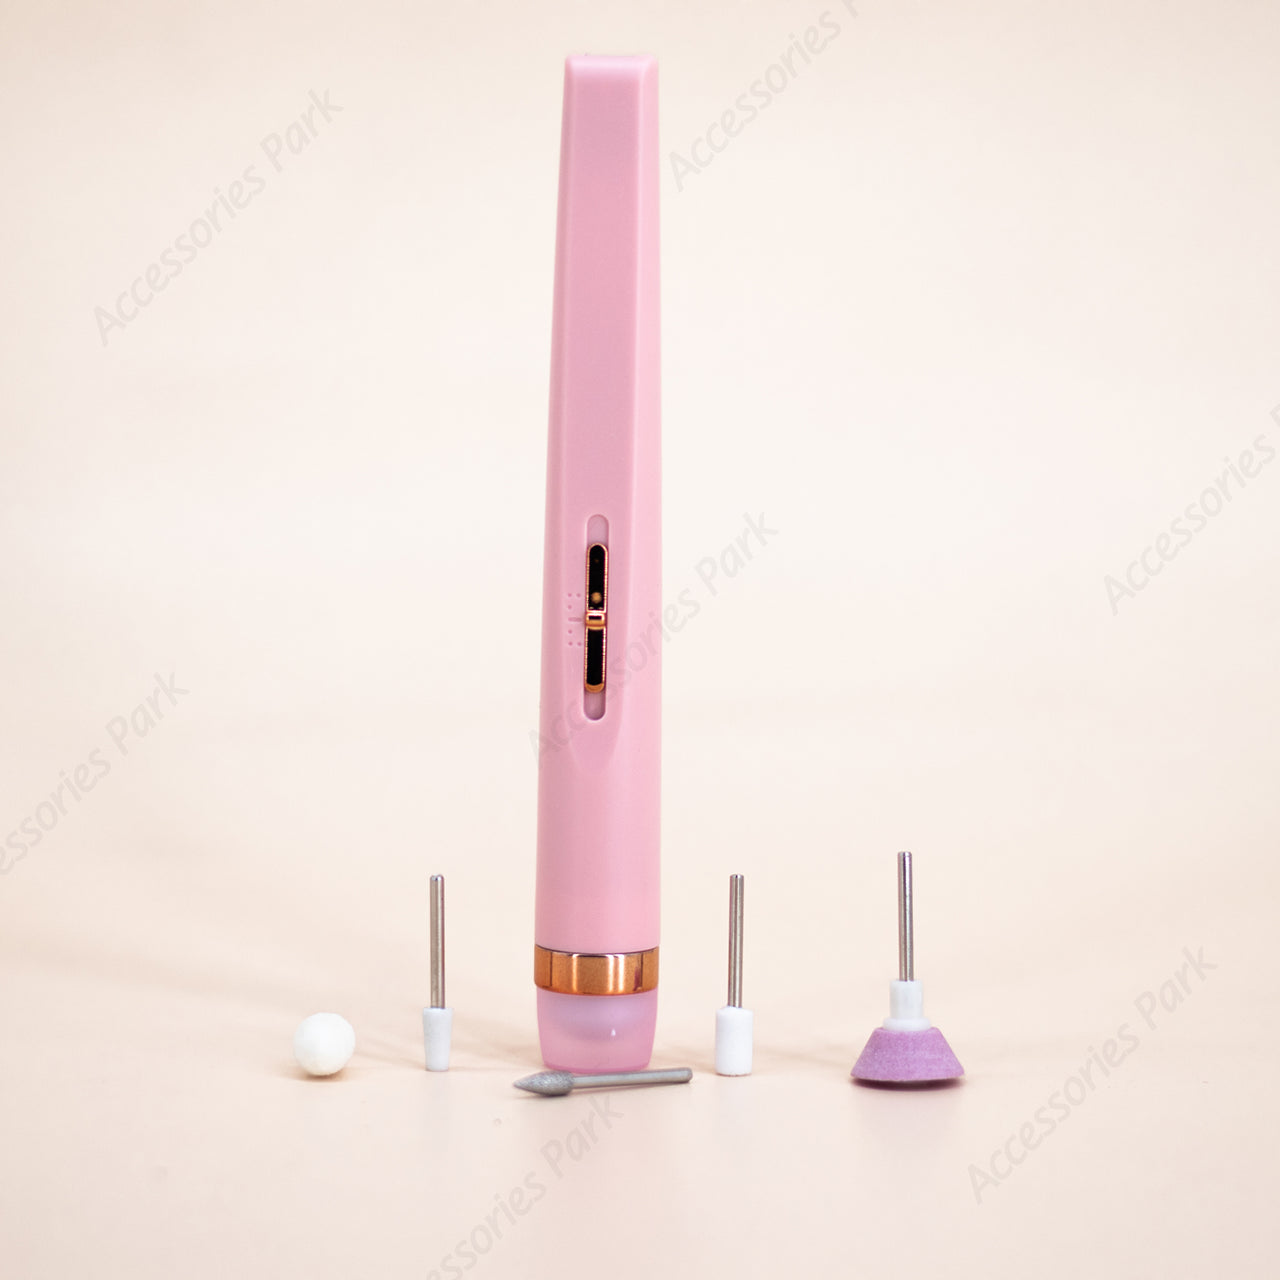 A pink color manicure device with five beads